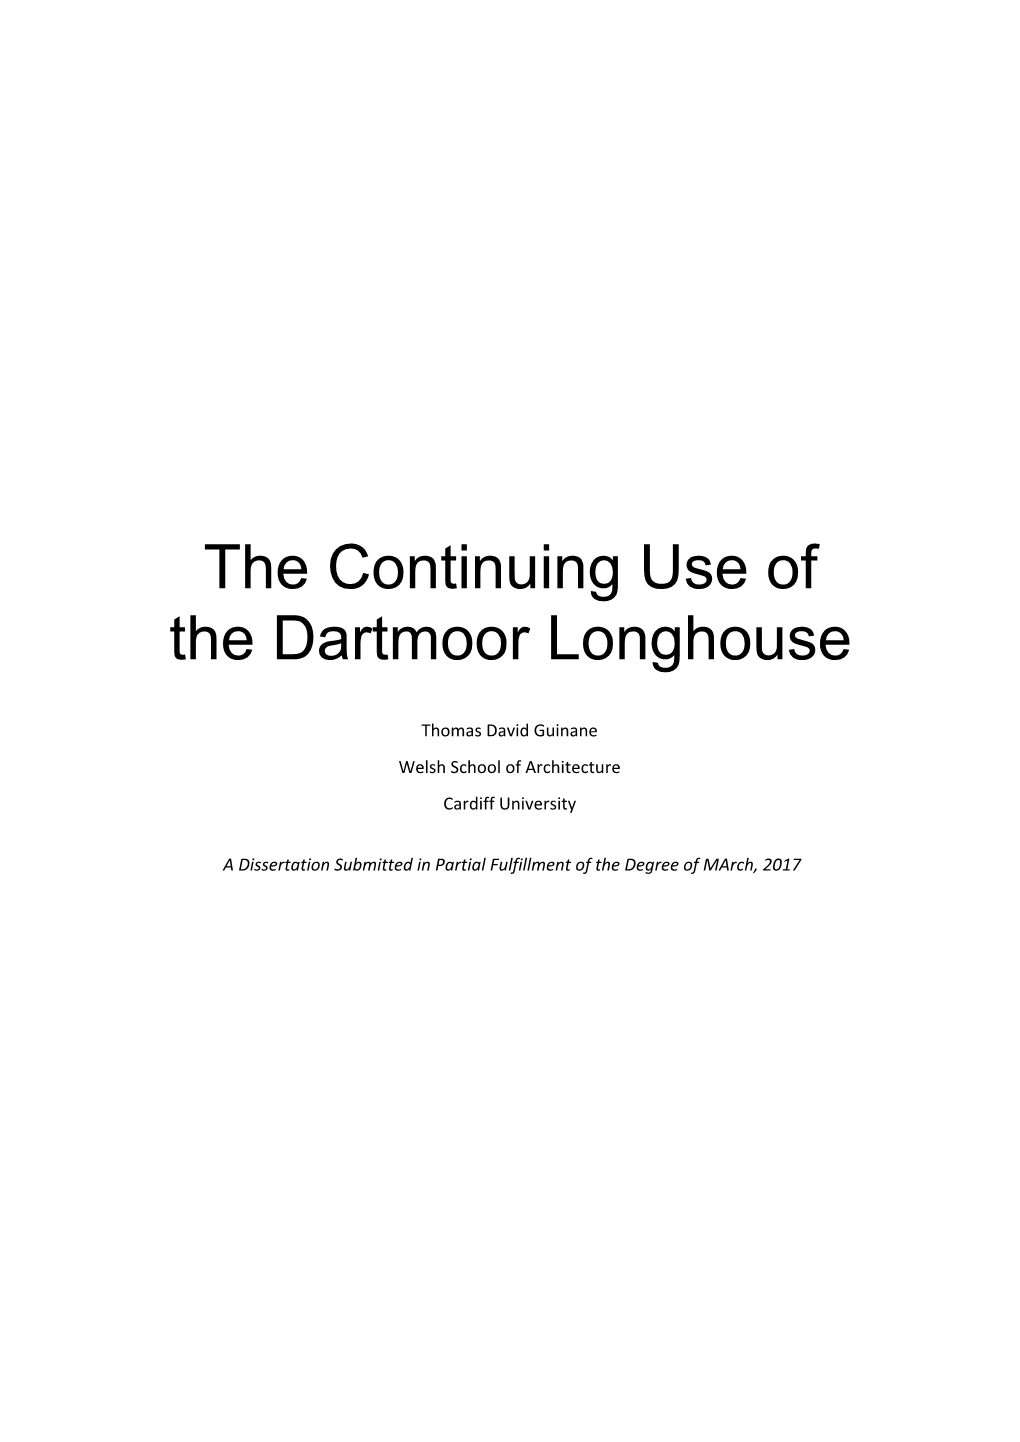 The Continuing Use of the Dartmoor Longhouse